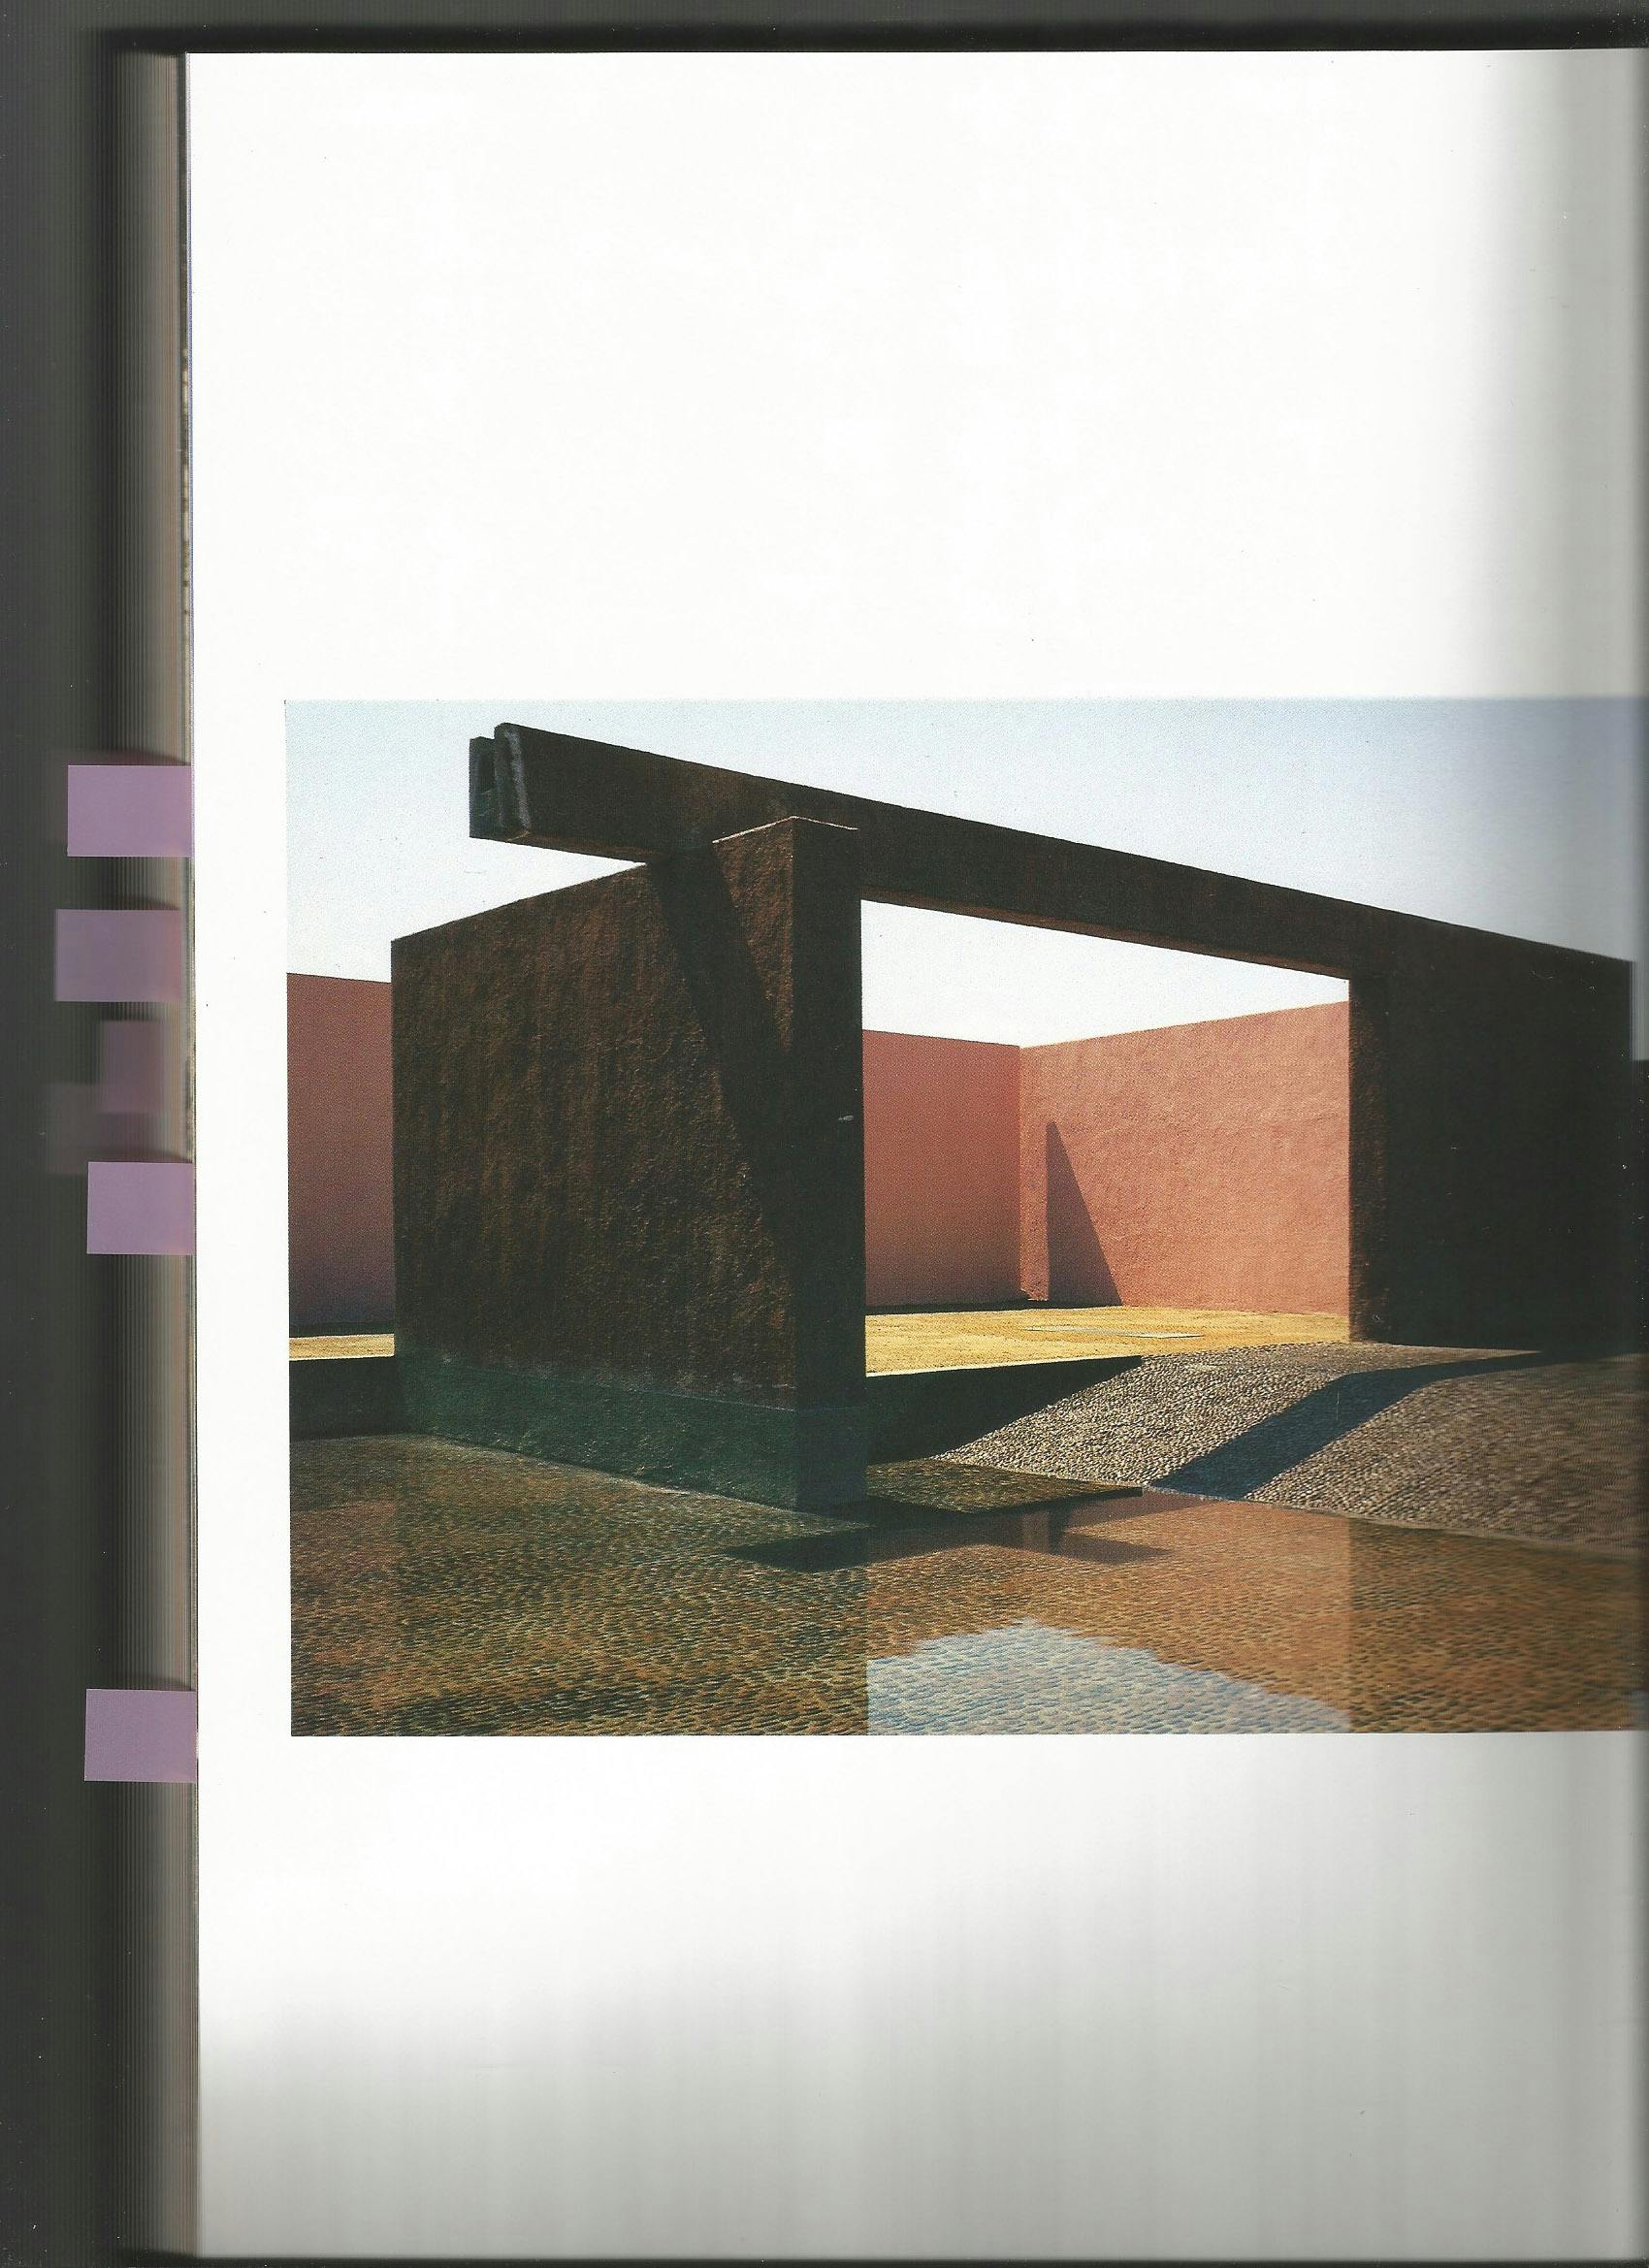 Armando Salas Portugal Photographs Moder Architecture of Mexico Vol. 1 - Luis Barragan - Satellite City Towers Front View